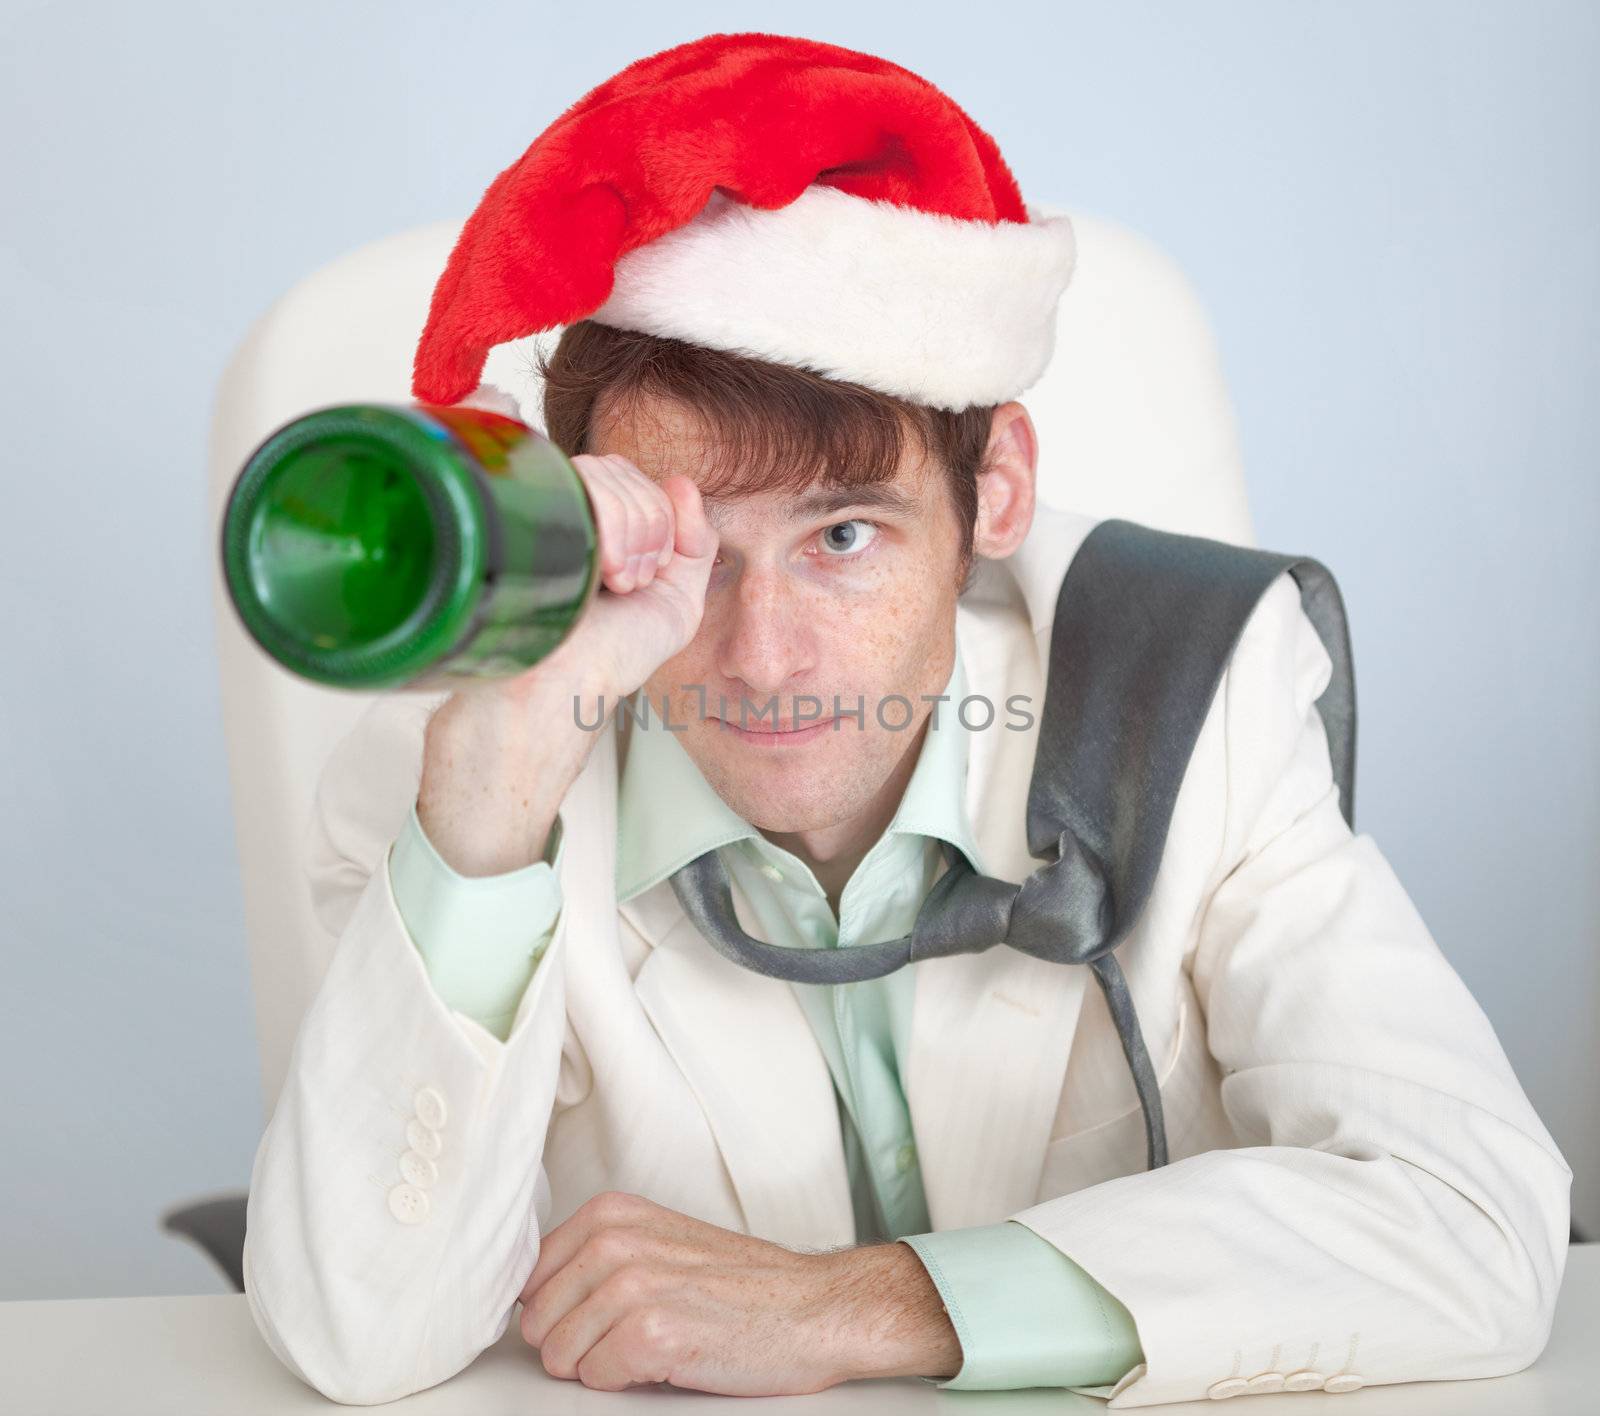 The drunk man in a Christmas cap plays with a bottle